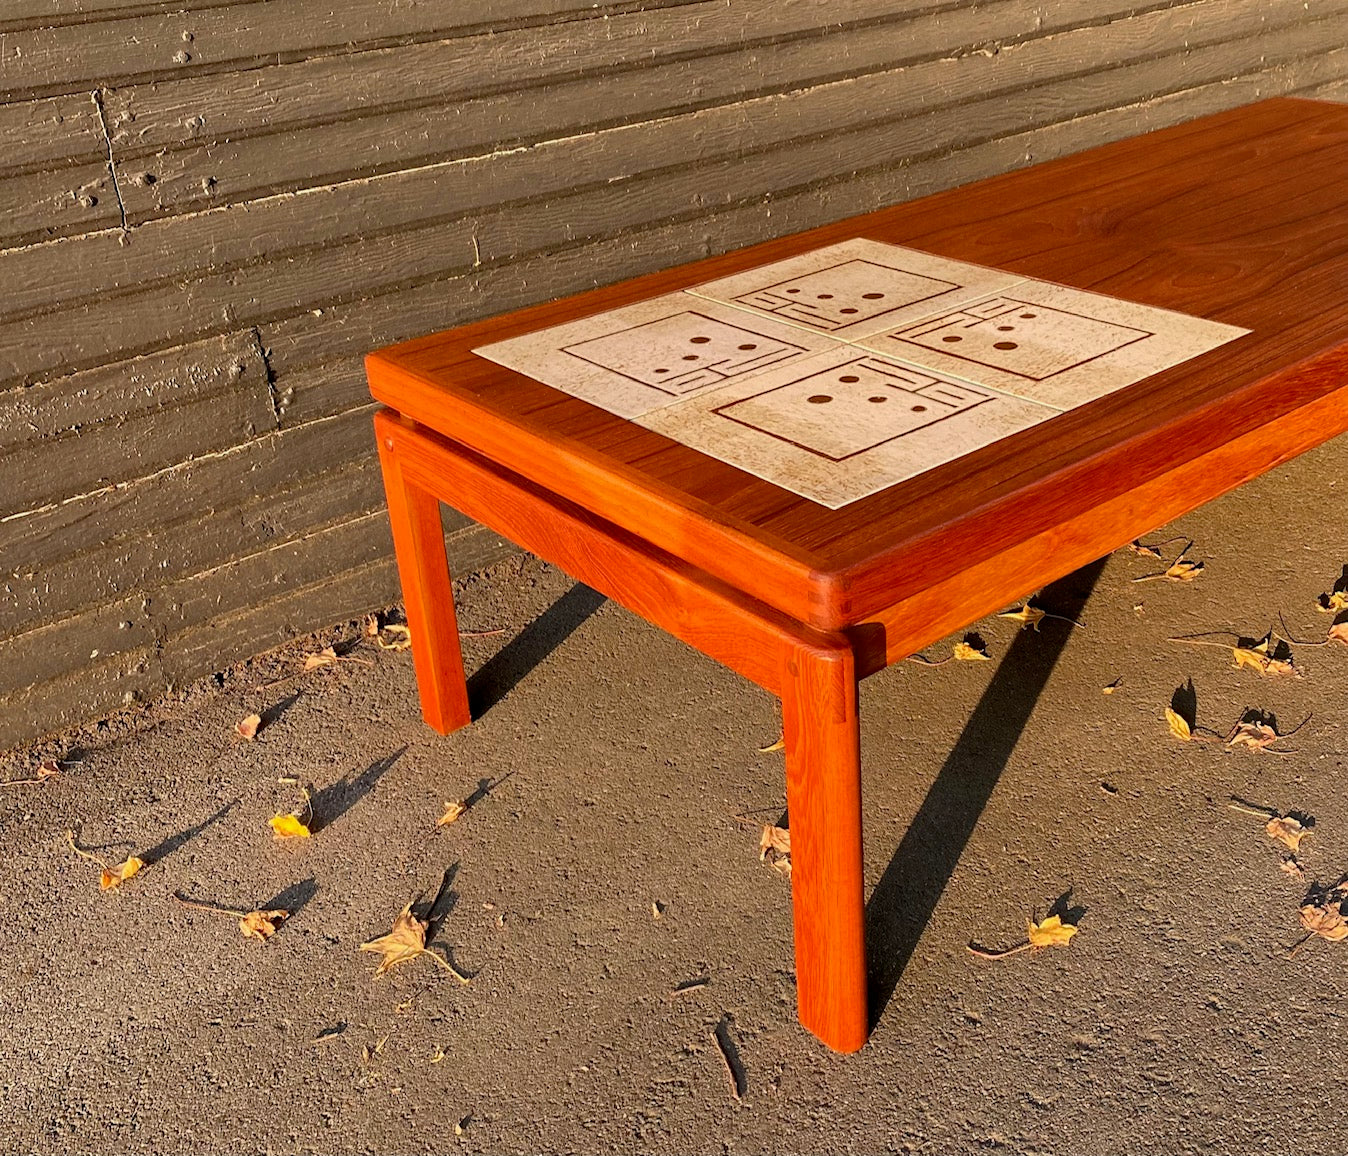 Stunning Danish mid-century modern teak coffee table with beautiful dovetail details and cream ceramic tile inlays. Attributed to H.W Klein- Cook Street Vintage